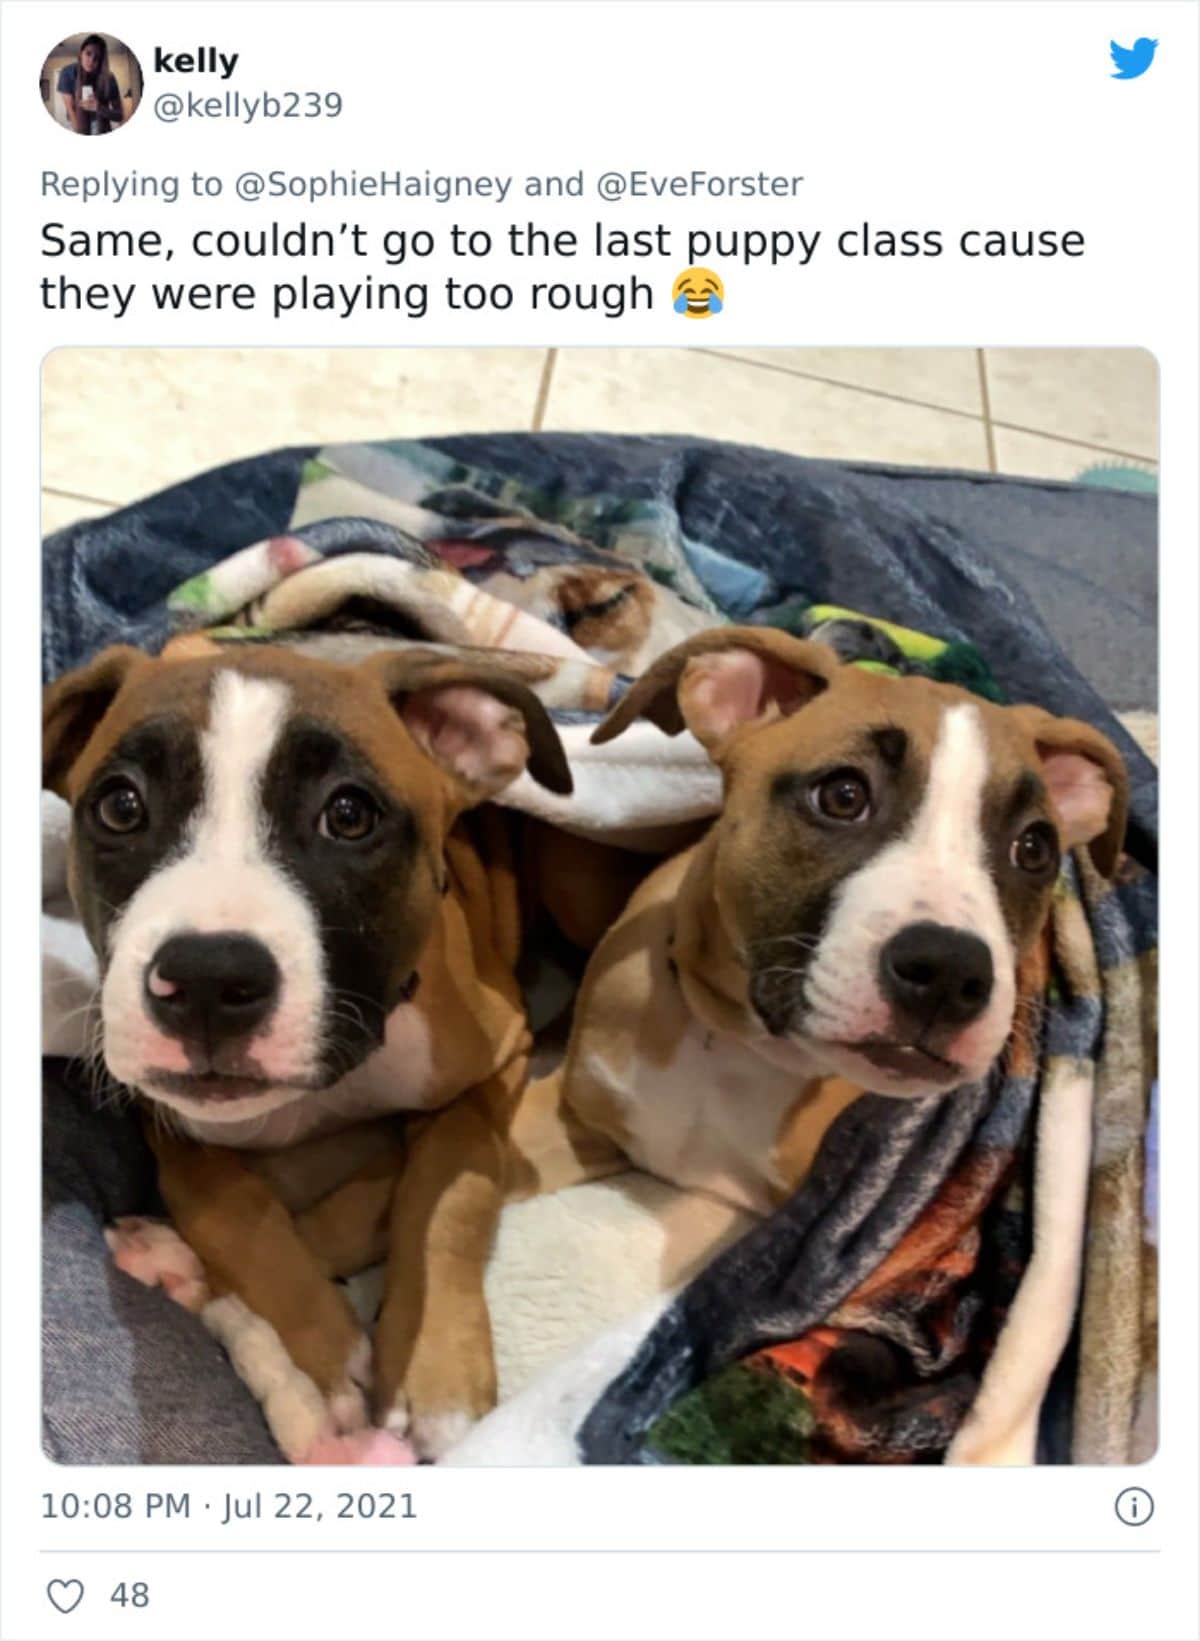 a tweet with a photo of two brown black and white puppies in a dog bed saying they got kicked out for playing too rough